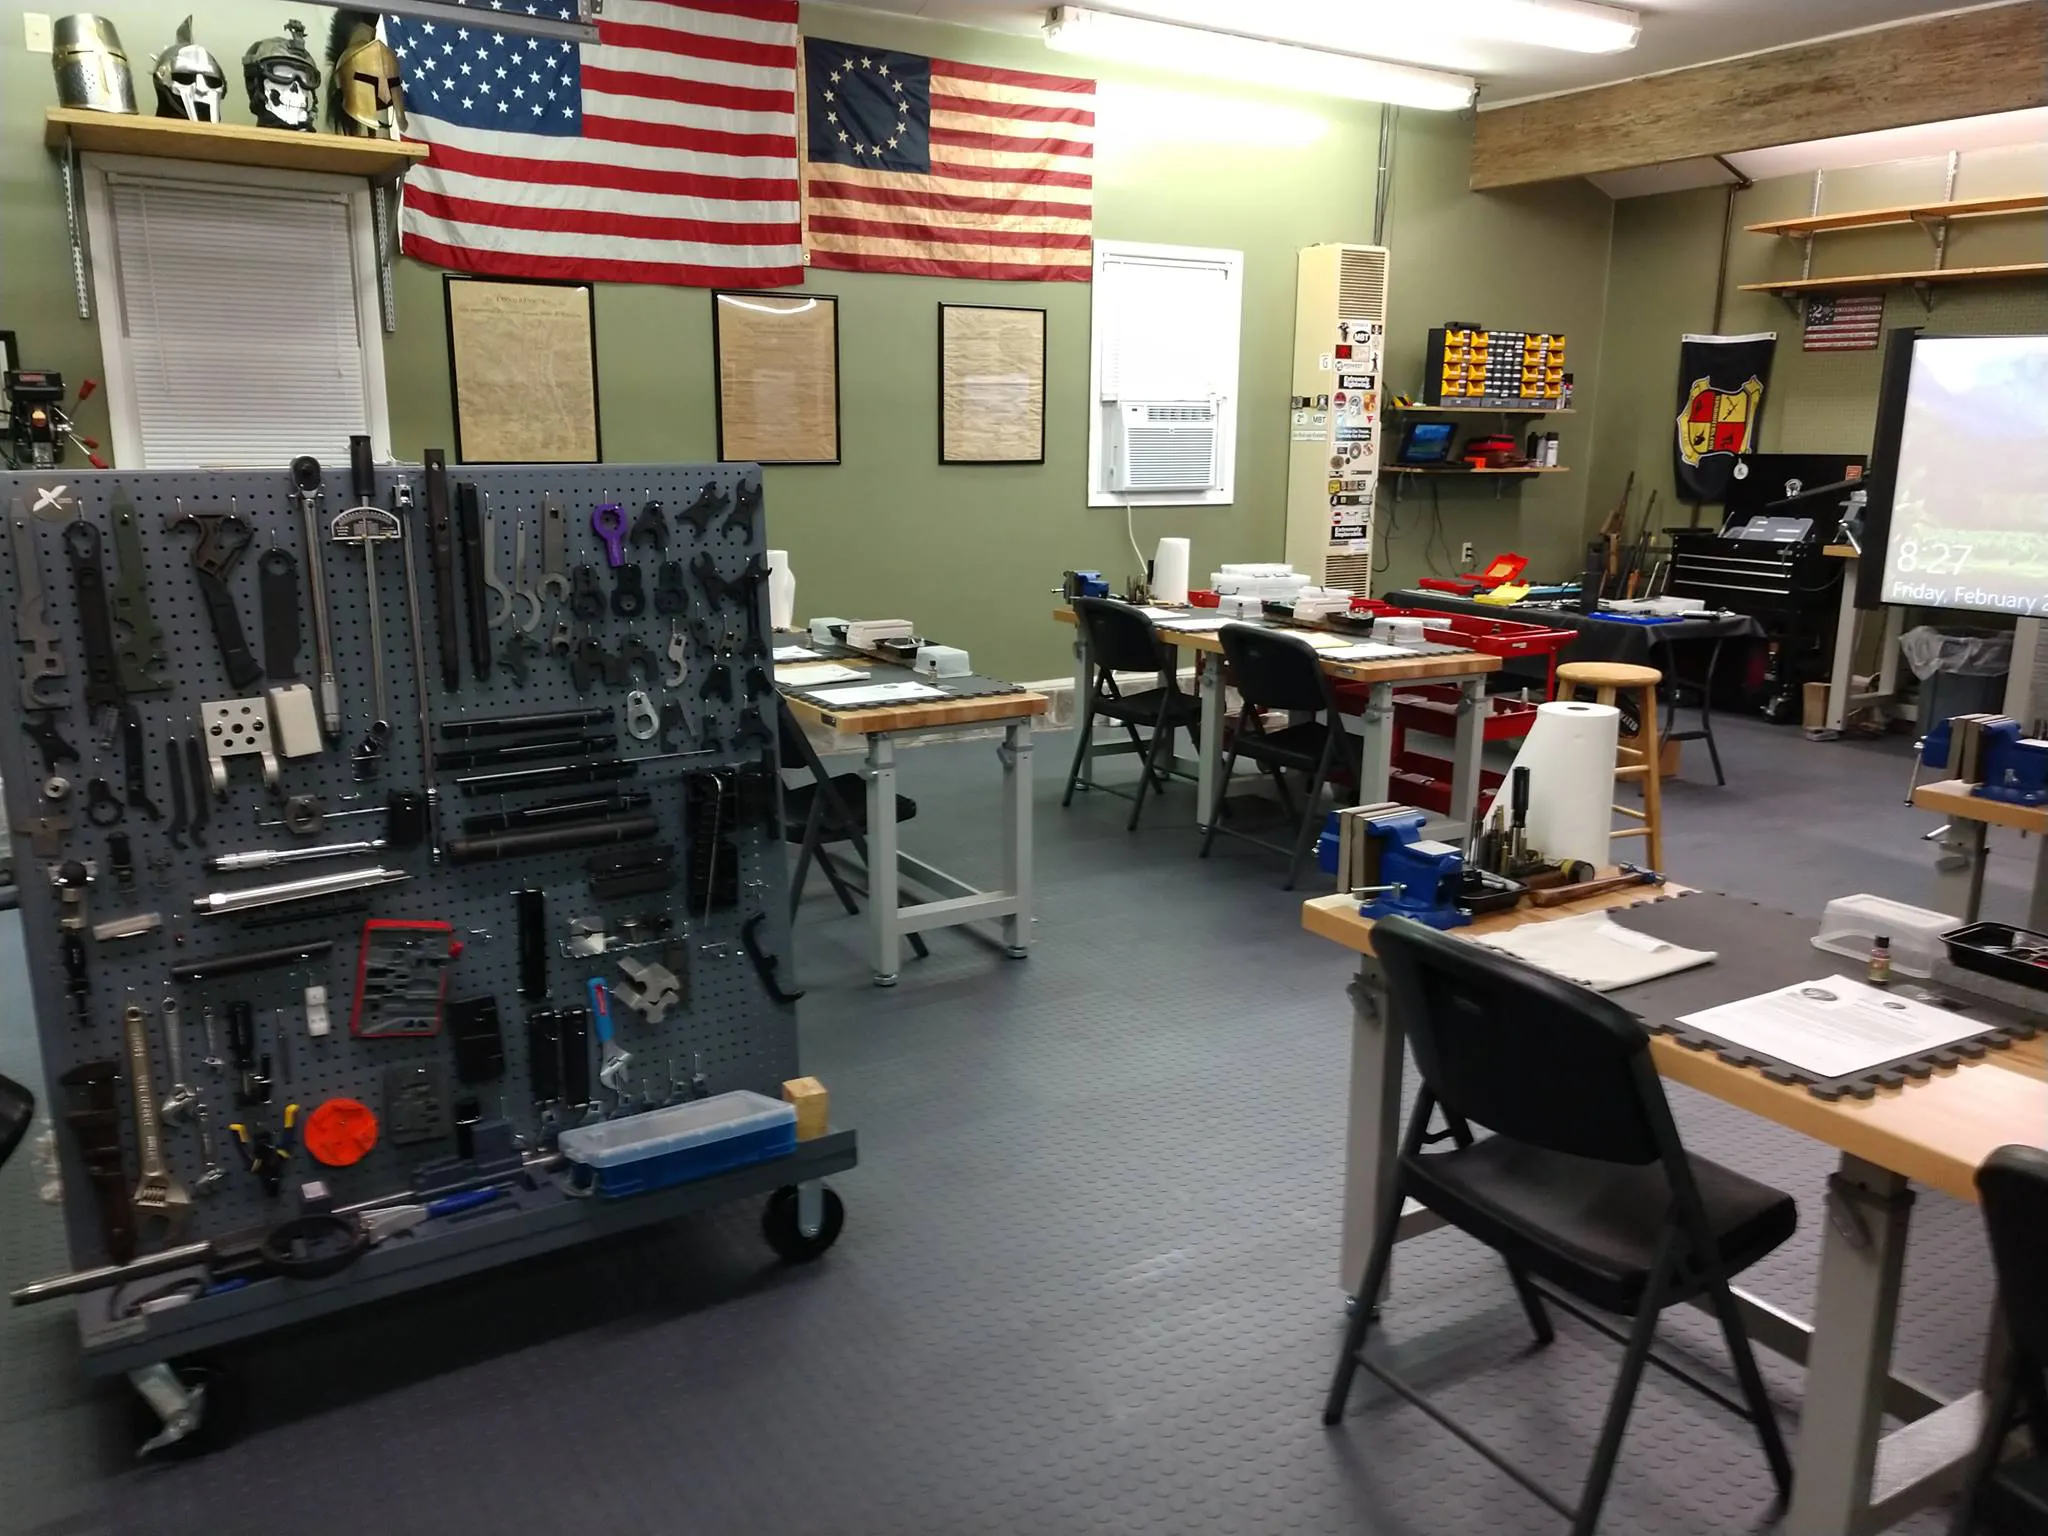 A room full of tools and equipment in a workshop.